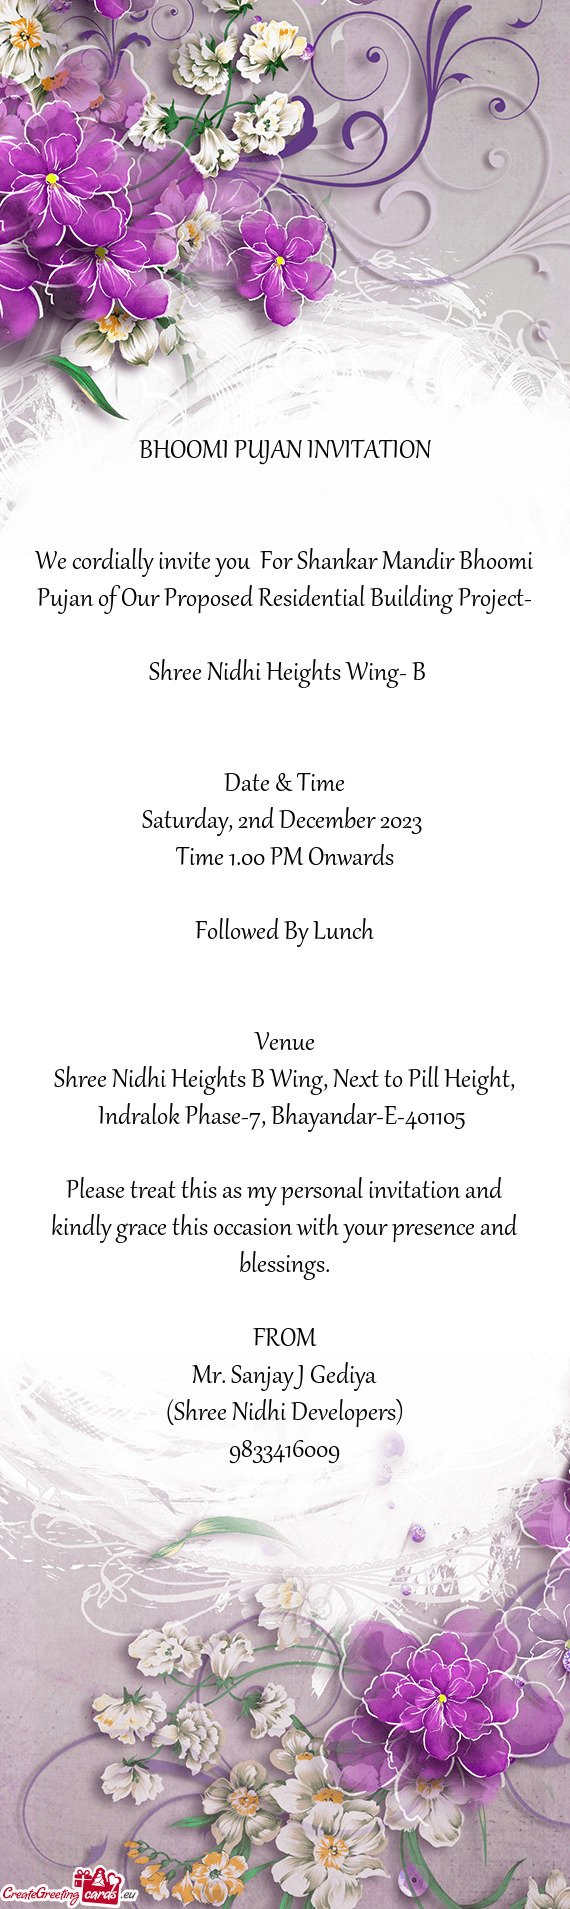 We cordially invite you For Shankar Mandir Bhoomi Pujan of Our Proposed Residential Building Projec